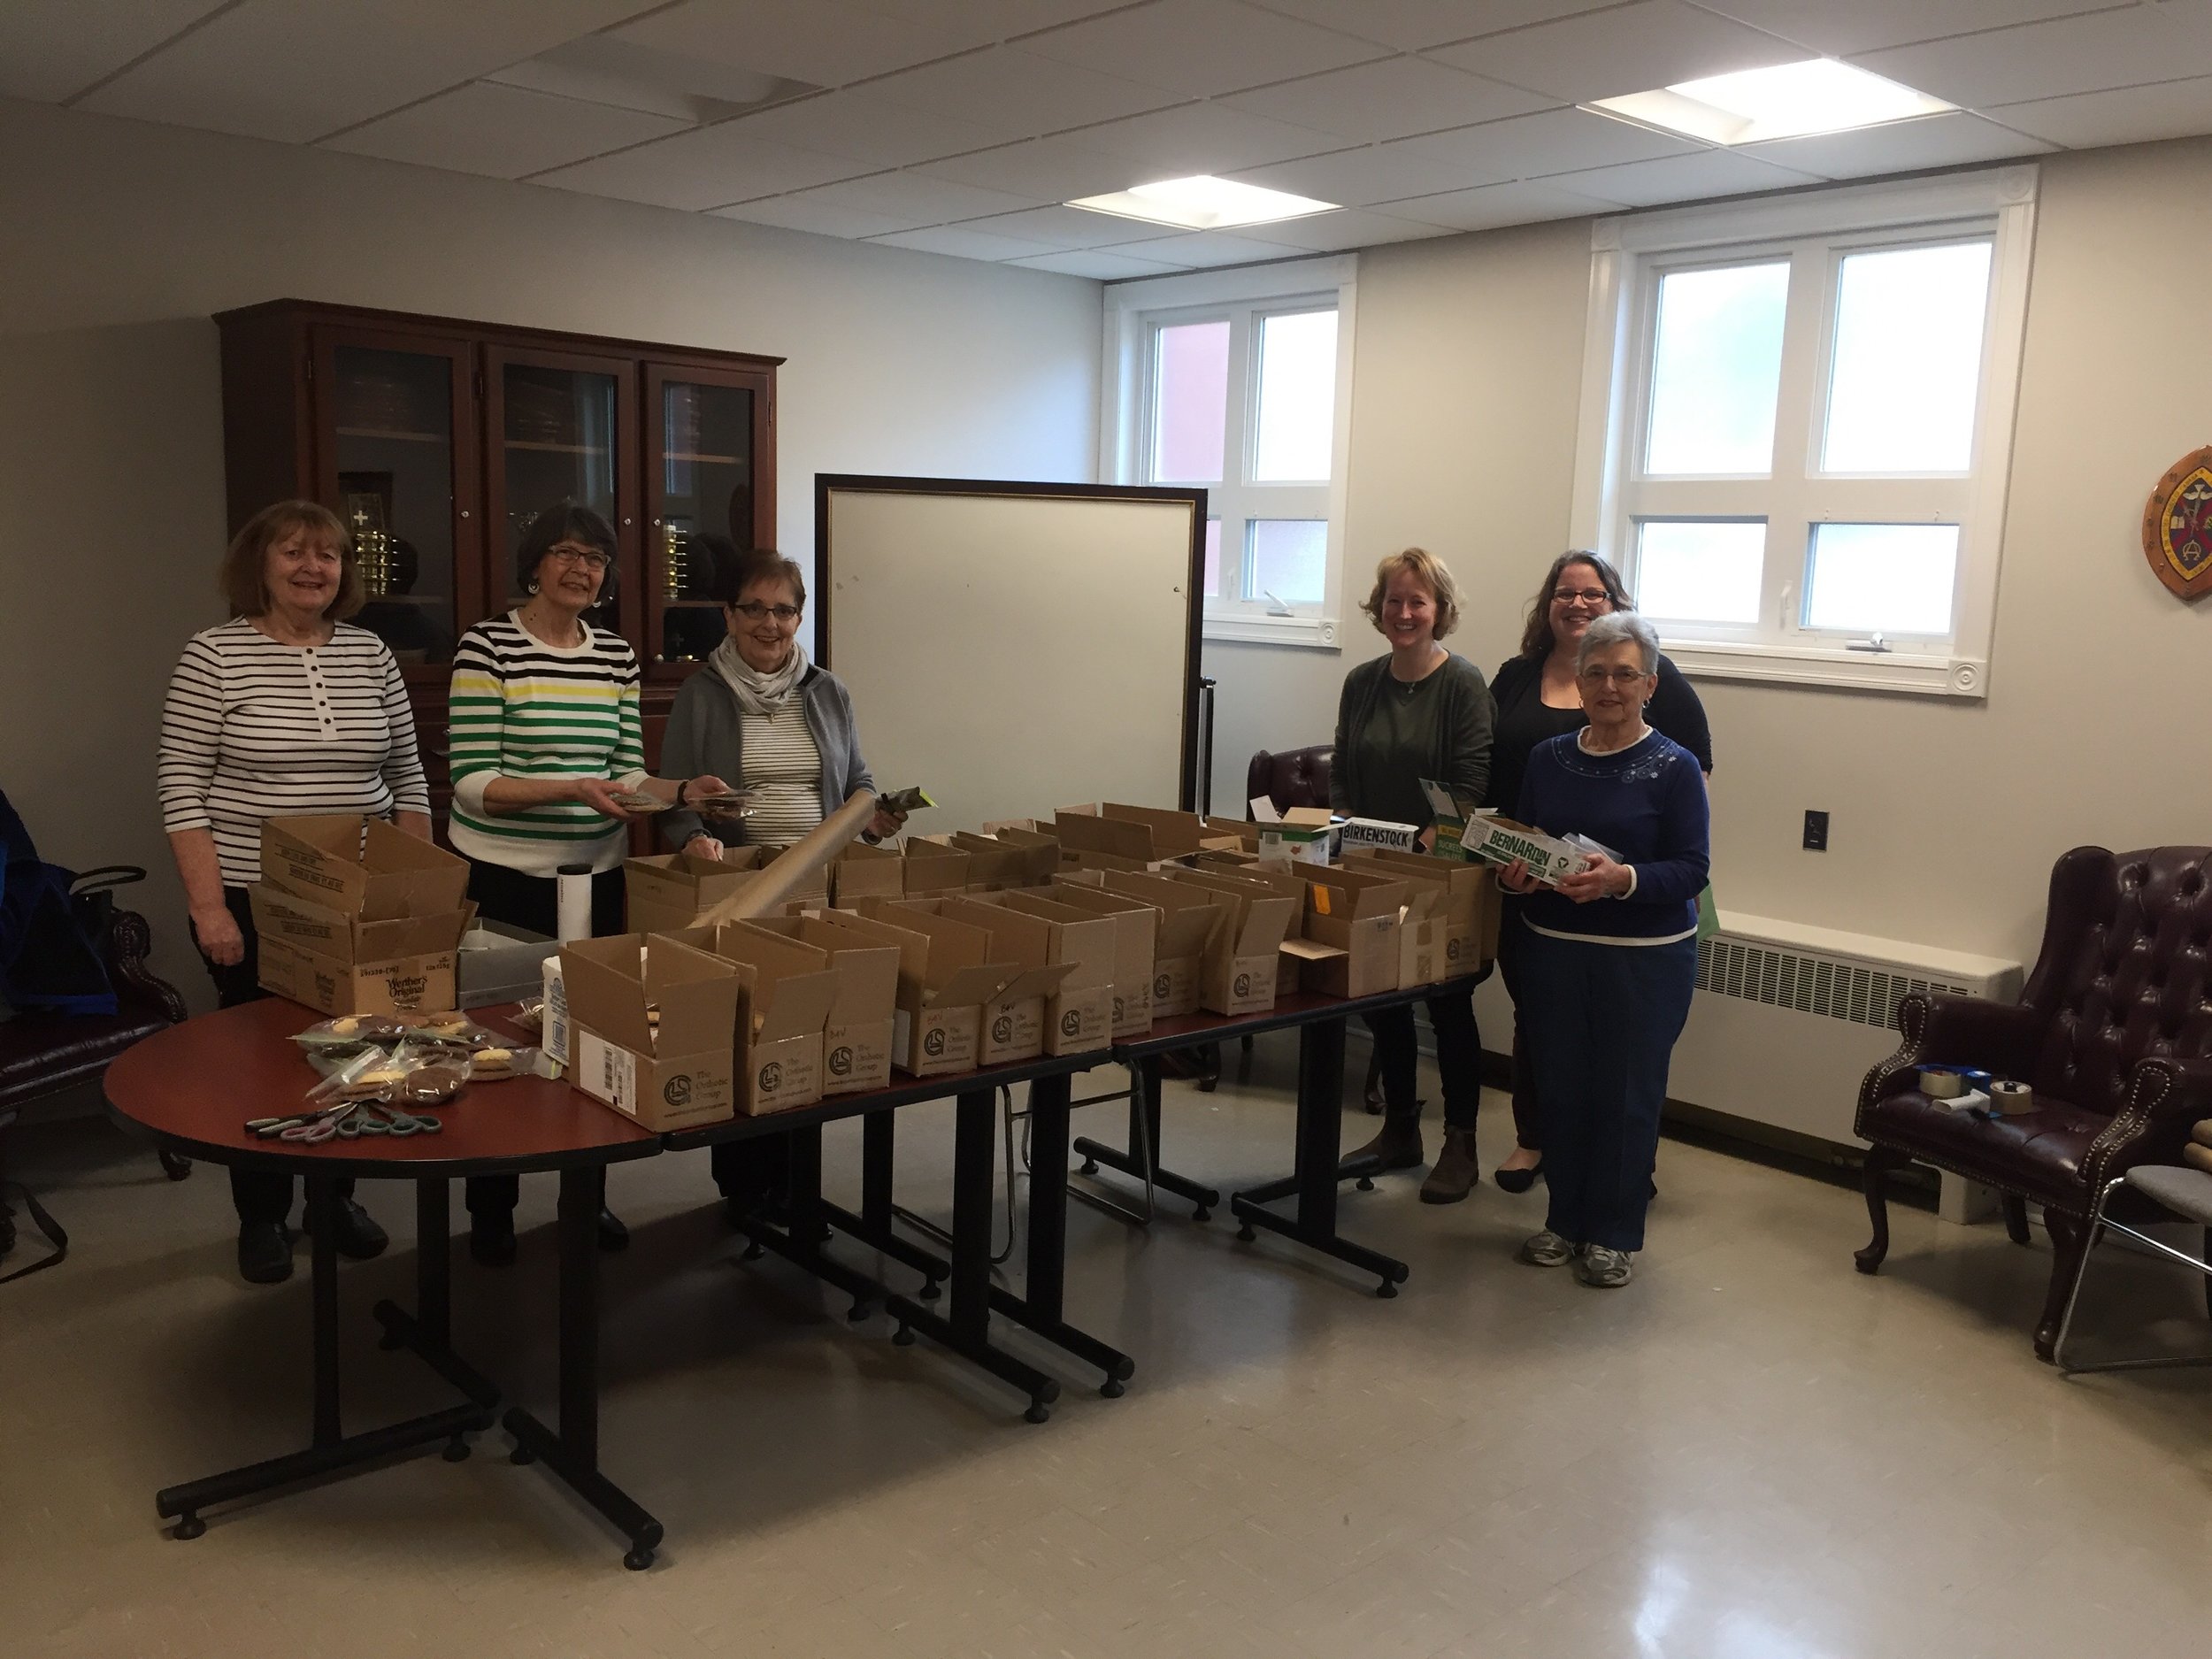  Student Care Packages are created and coordinated with the generous support of our congregation. This year we packed thirty-five boxes and the thank you notes have already started to come in. A thank you is extended to Karen Crouse, Yvonne Hirtle, A